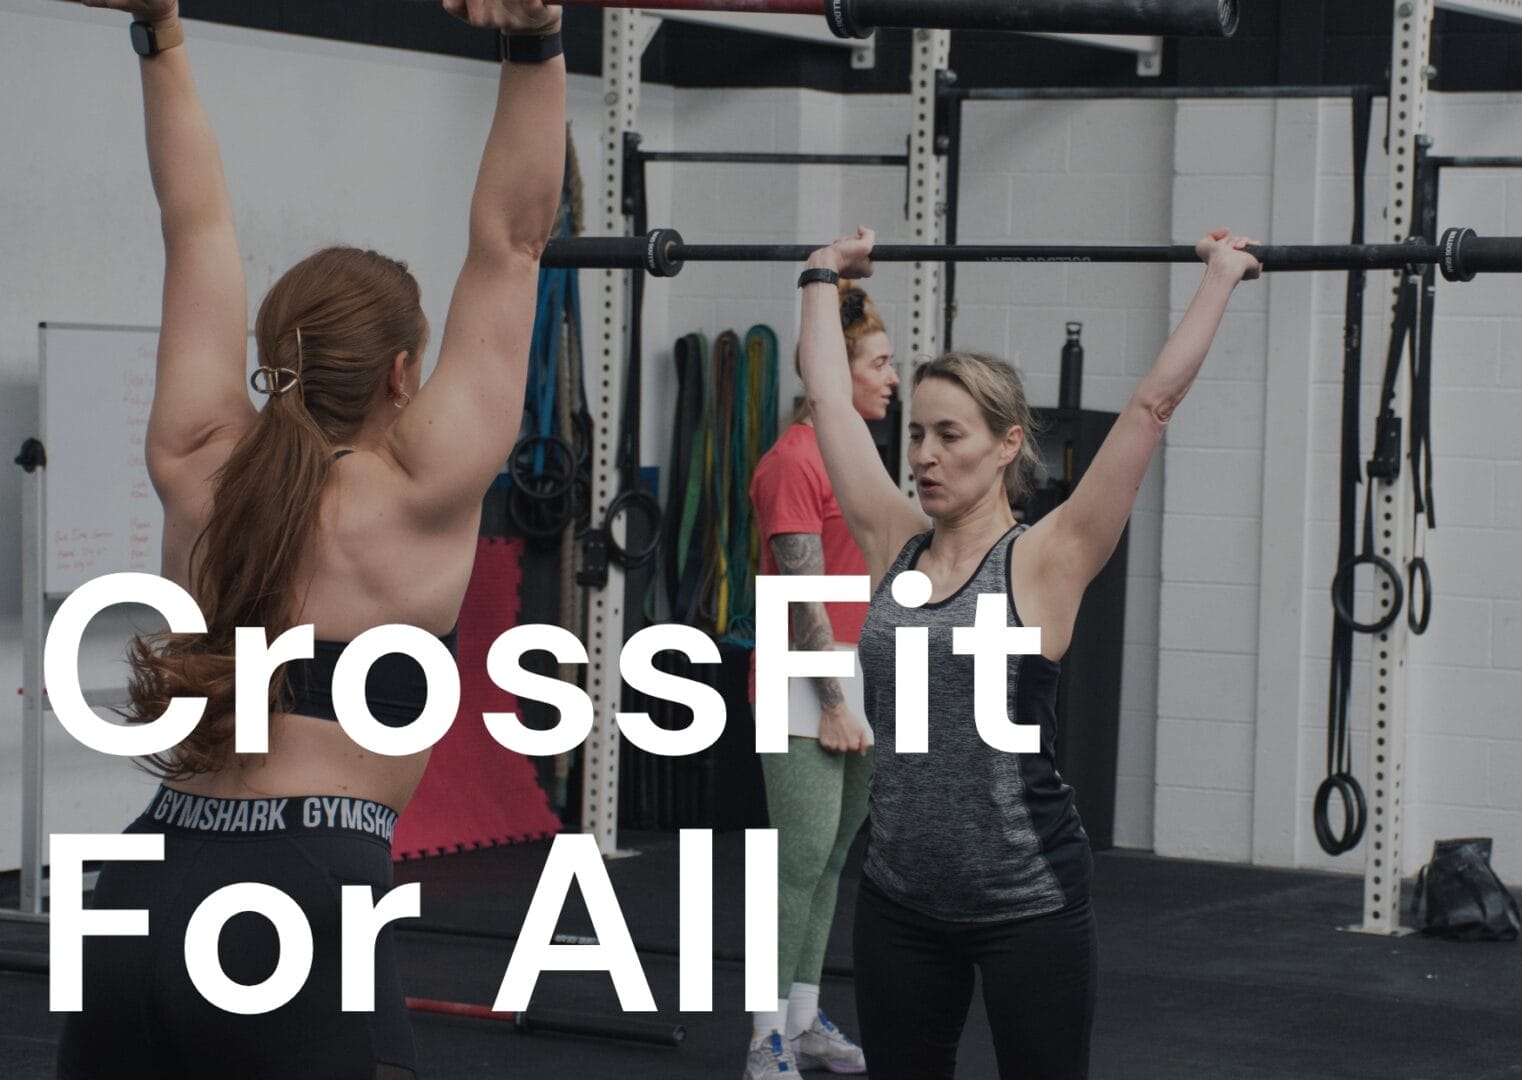 CrossFit for Busy professionals